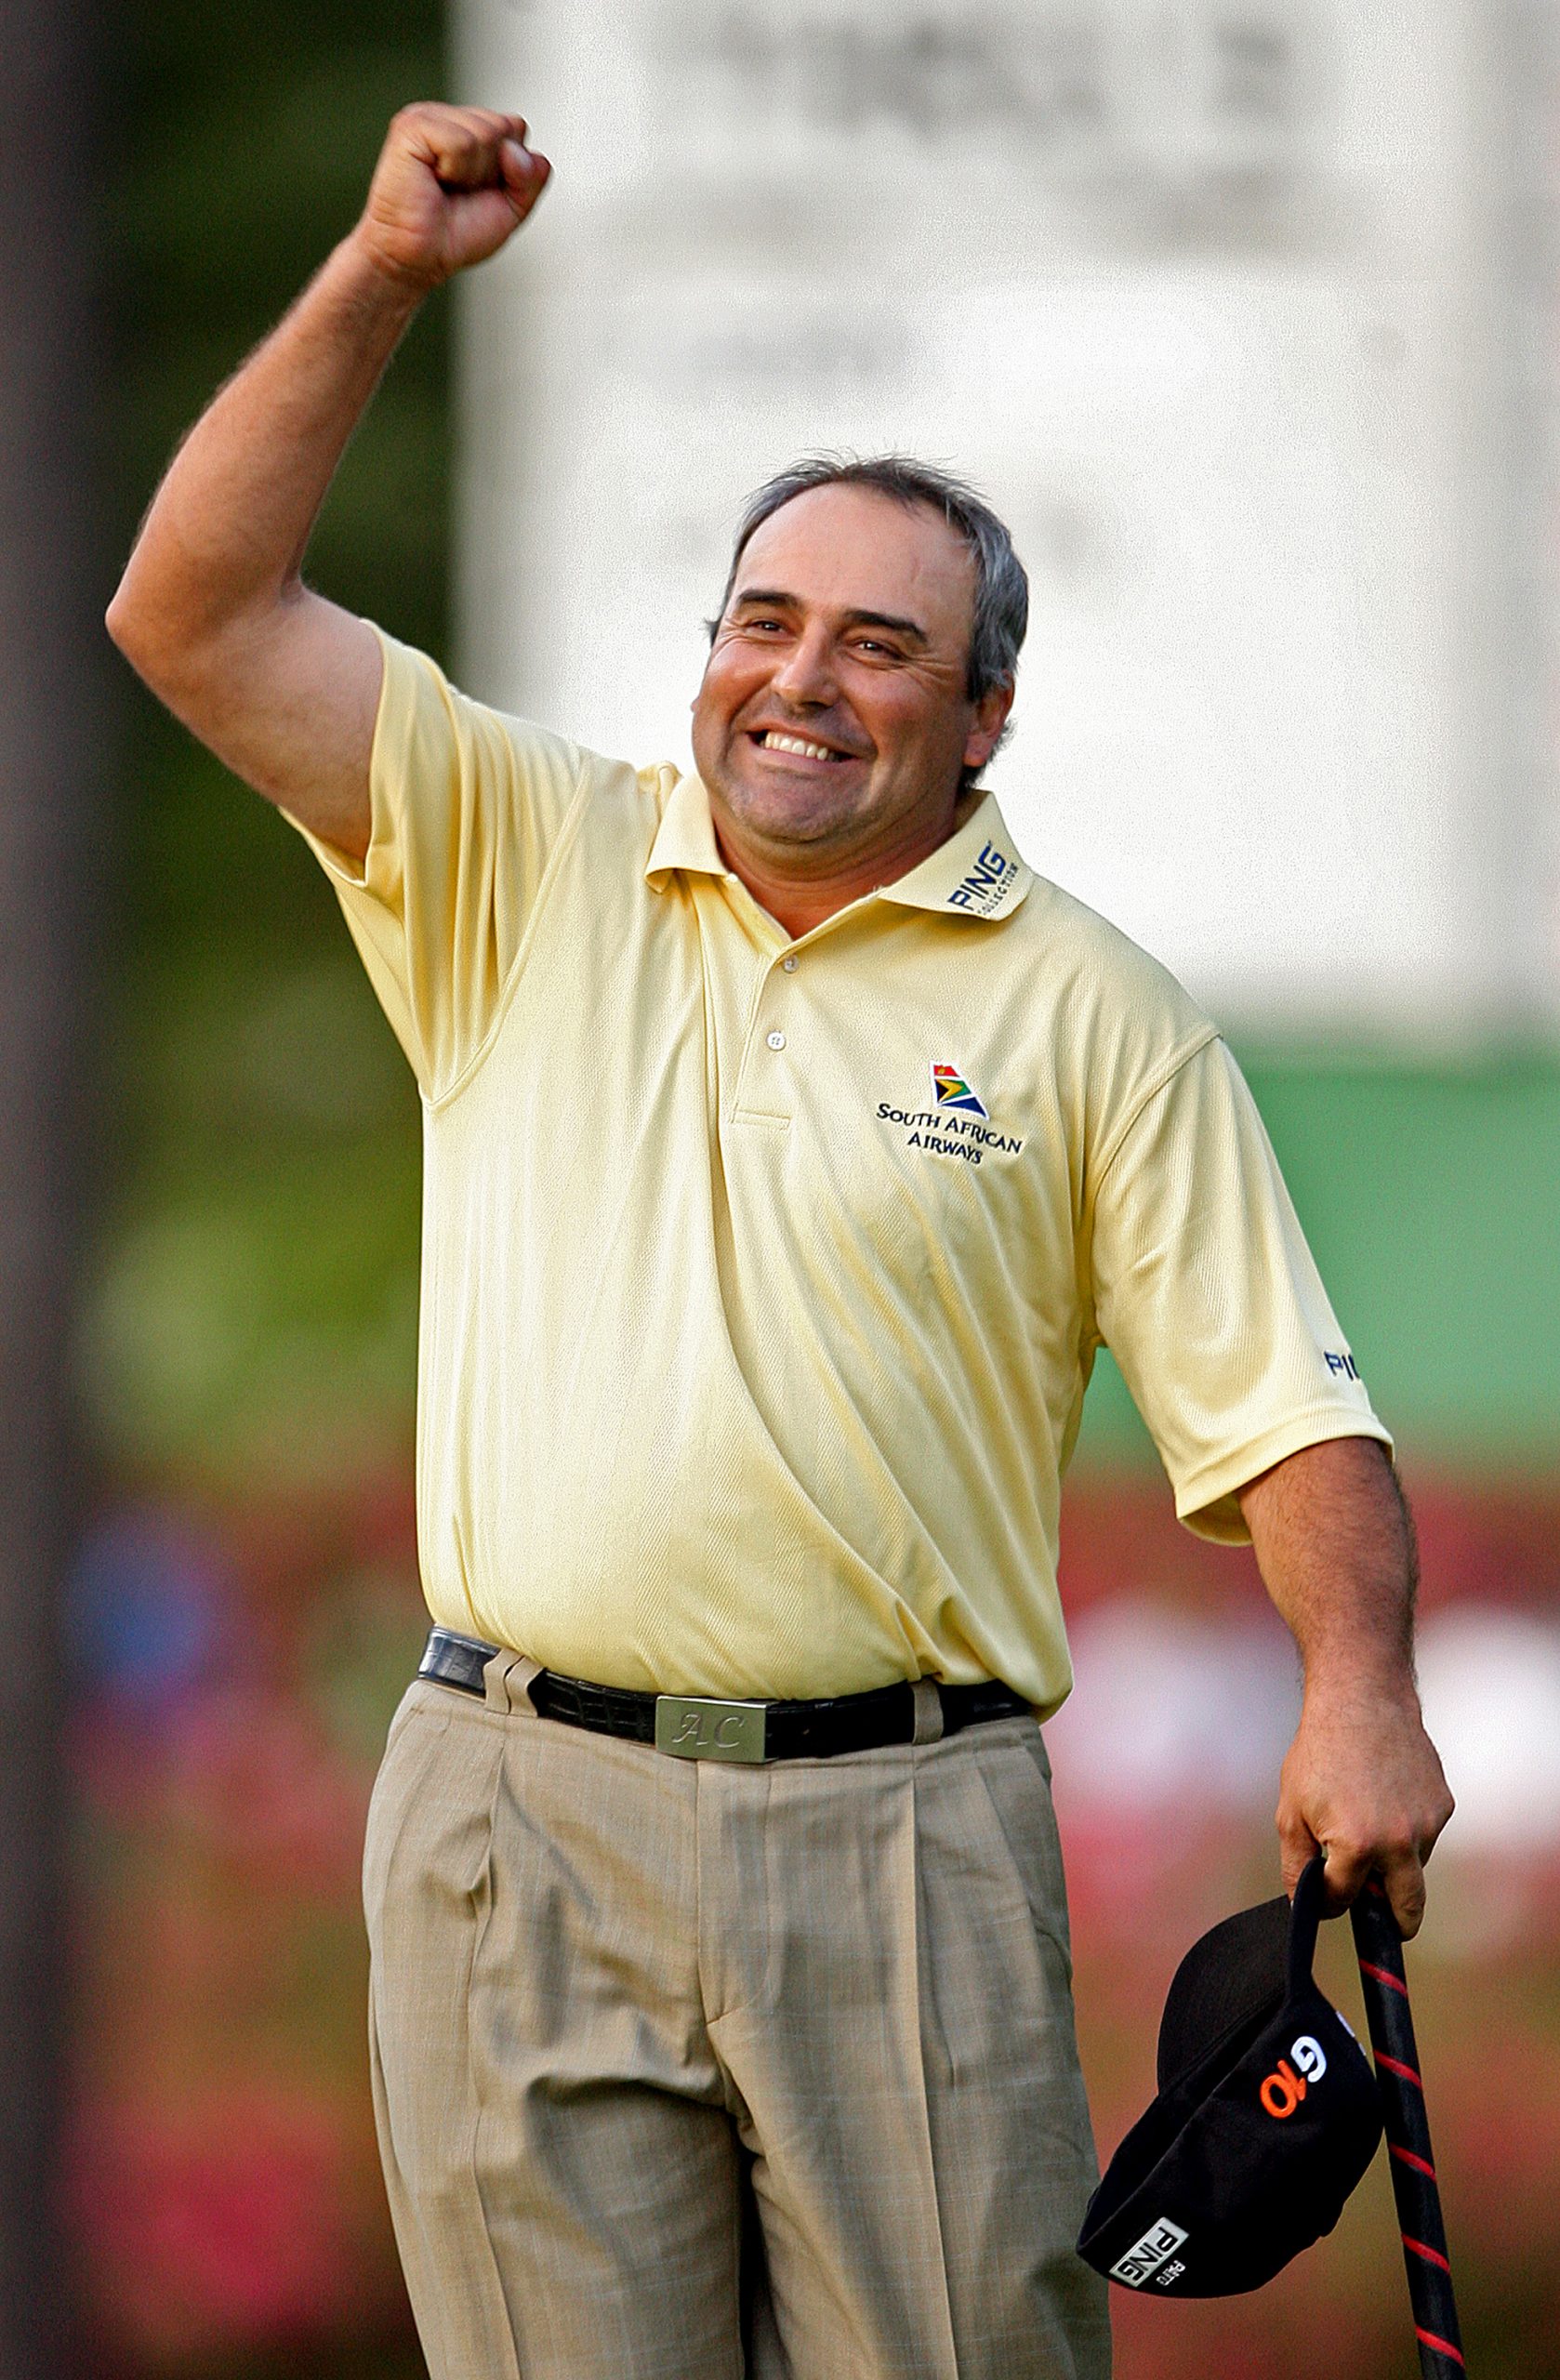 Former Masters winner Angel Cabrera reinstated by PGA after two years in ‘Prison of Hell’ with rapists and murderers